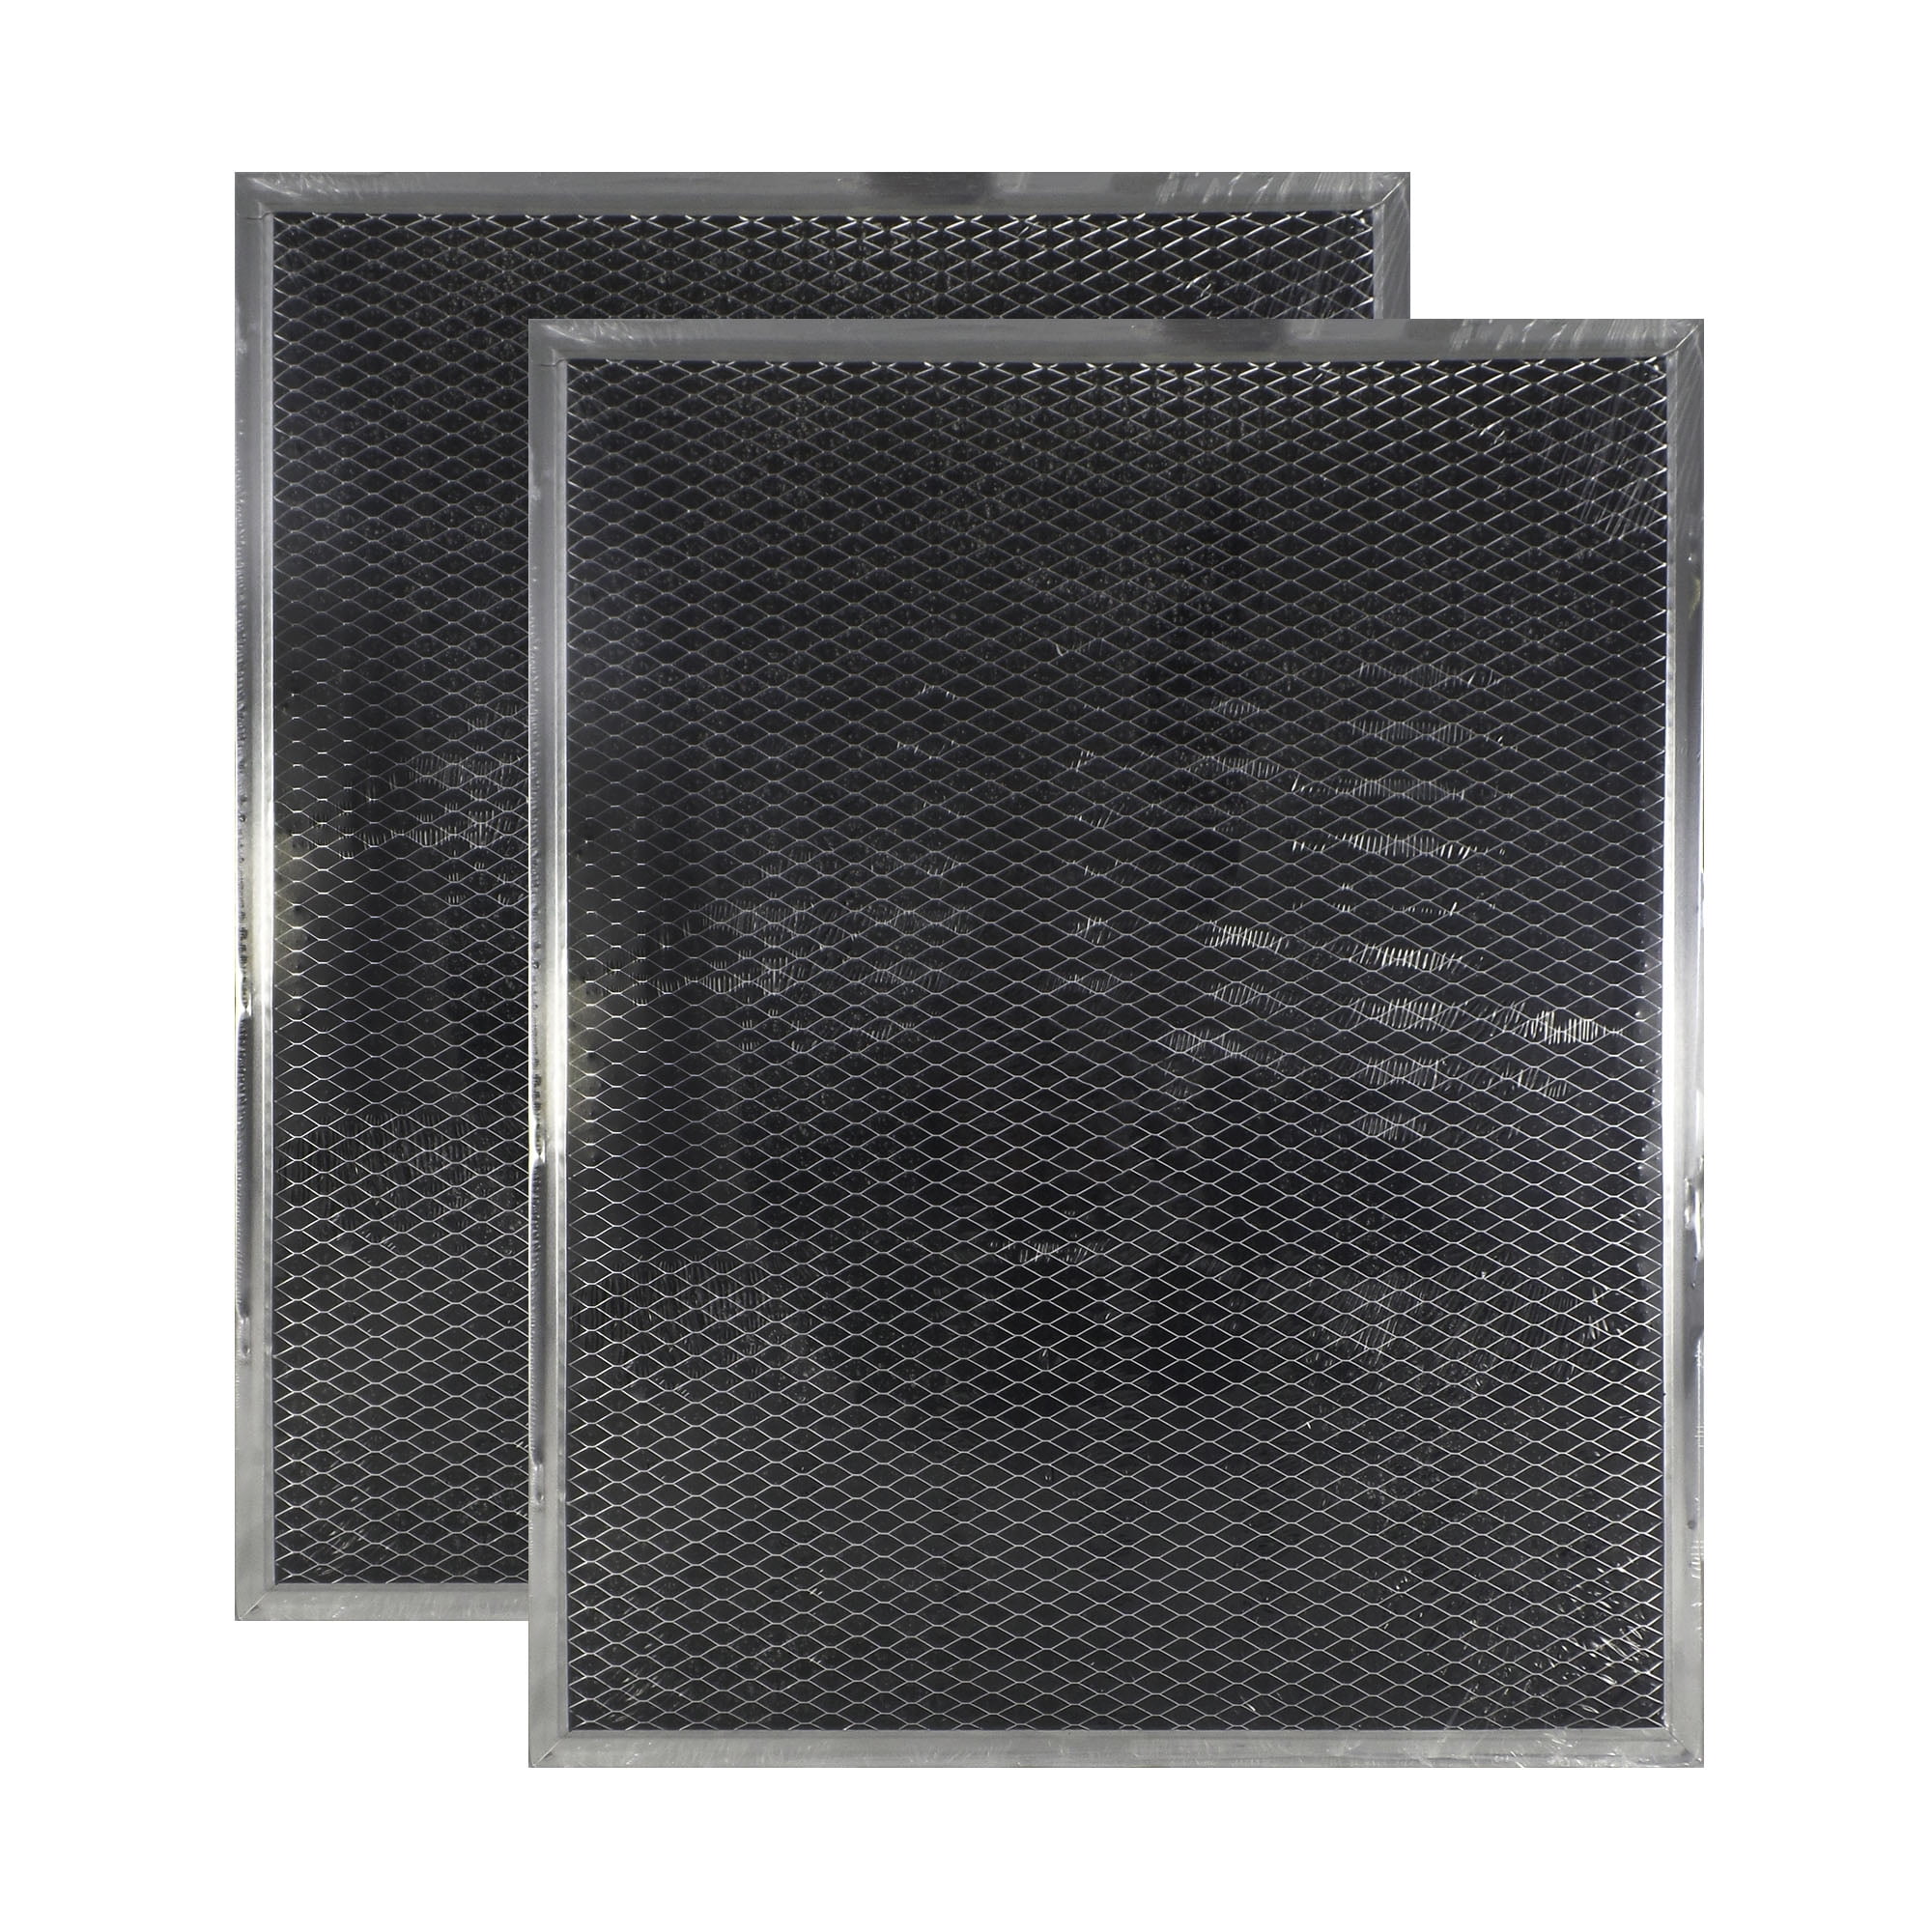 Charcoal Hood Filter for GE WB2X8253 WB02X10700 WB02X8253 WB2X8406 4 PACK 